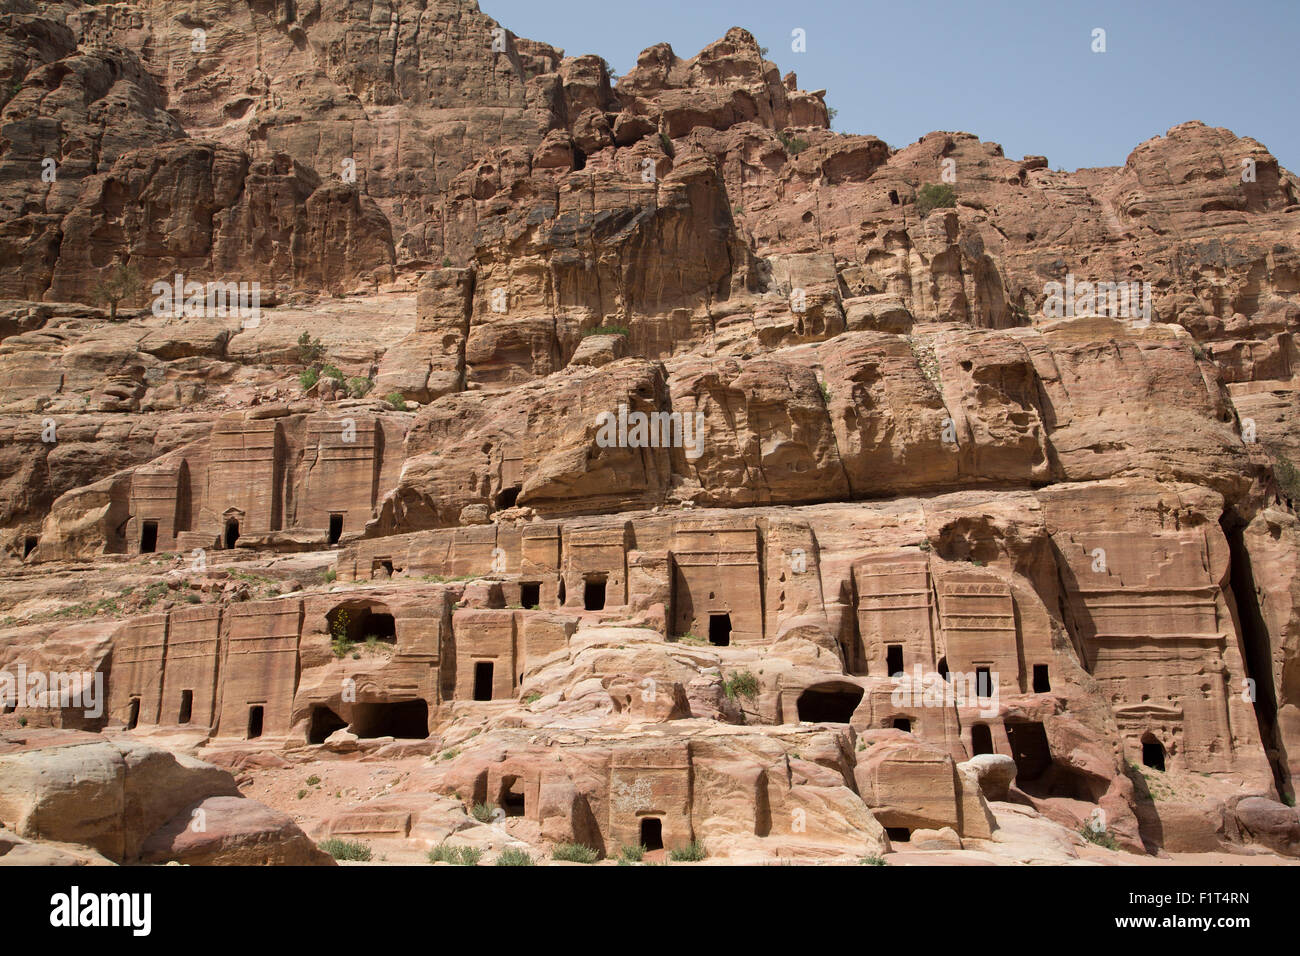 Tombs in the Wadi Musa Area, dating from between 50 BC and 50 AD, Petra, UNESCO World Heritage Site, Jordan, Middle East Stock Photo